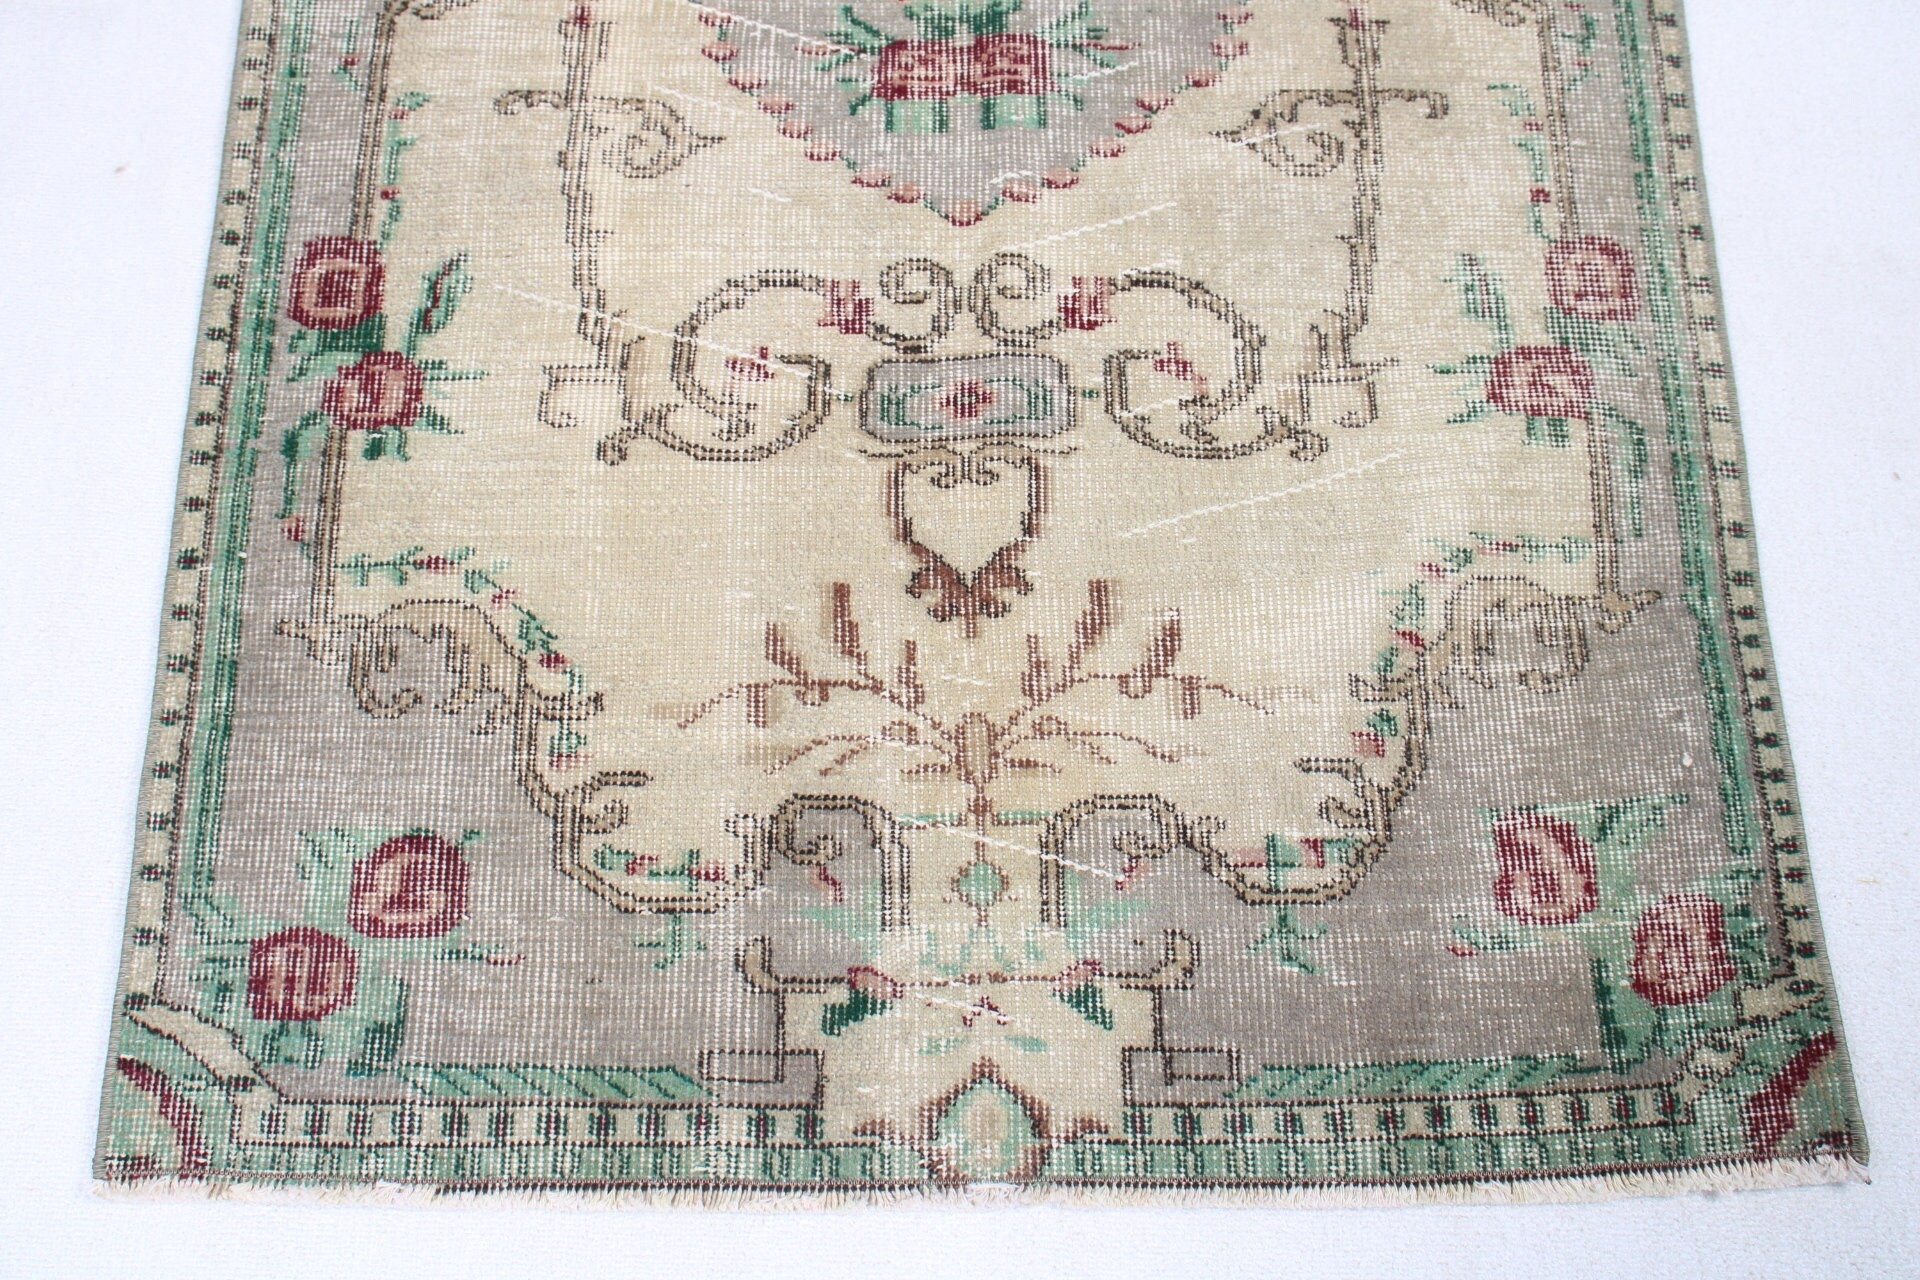 3.1x6.2 ft Accent Rug, Old Rug, Beige Bedroom Rugs, Turkish Rugs, Kitchen Rugs, Vintage Rug, Eclectic Rug, Anatolian Rugs, Rugs for Bedroom